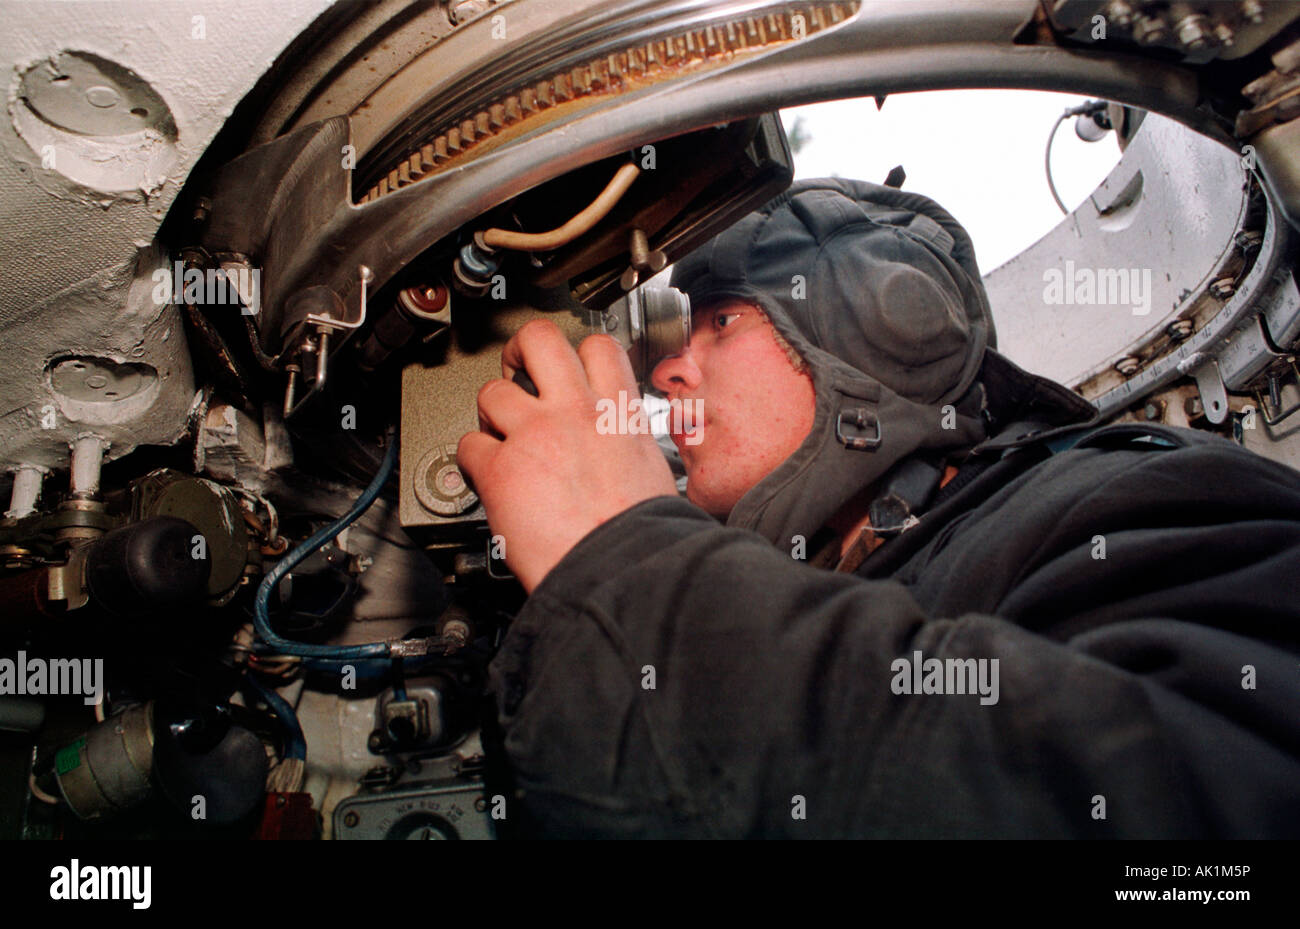 Military Tank Interior High Resolution Stock Photography And Images Alamy